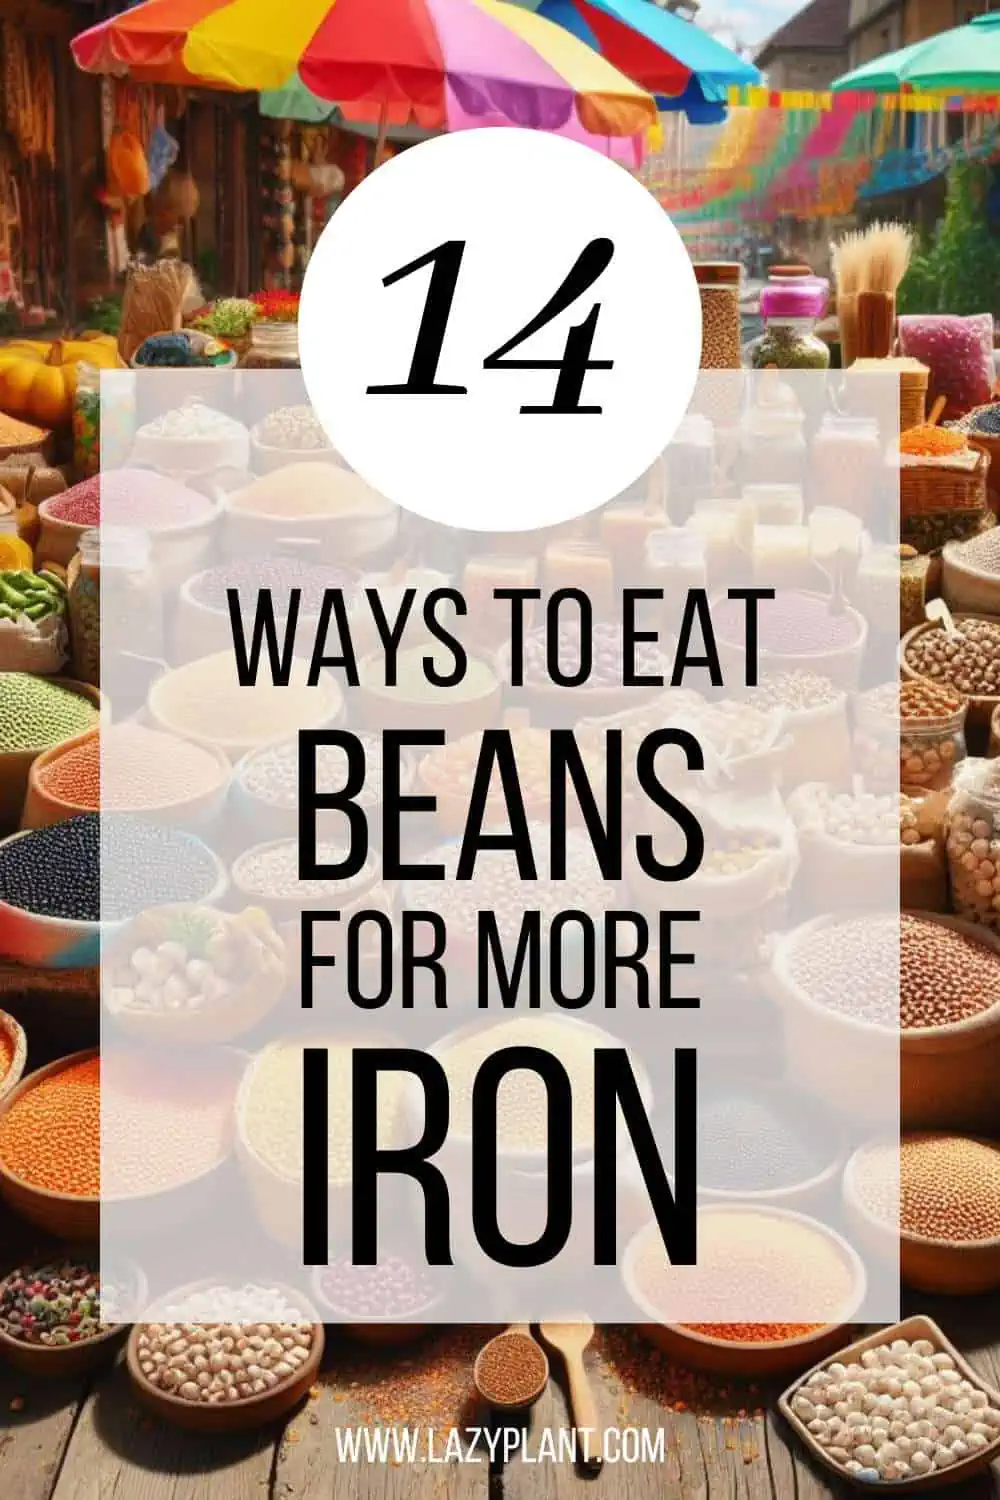 How to eat Beans for increased Iron absorption?